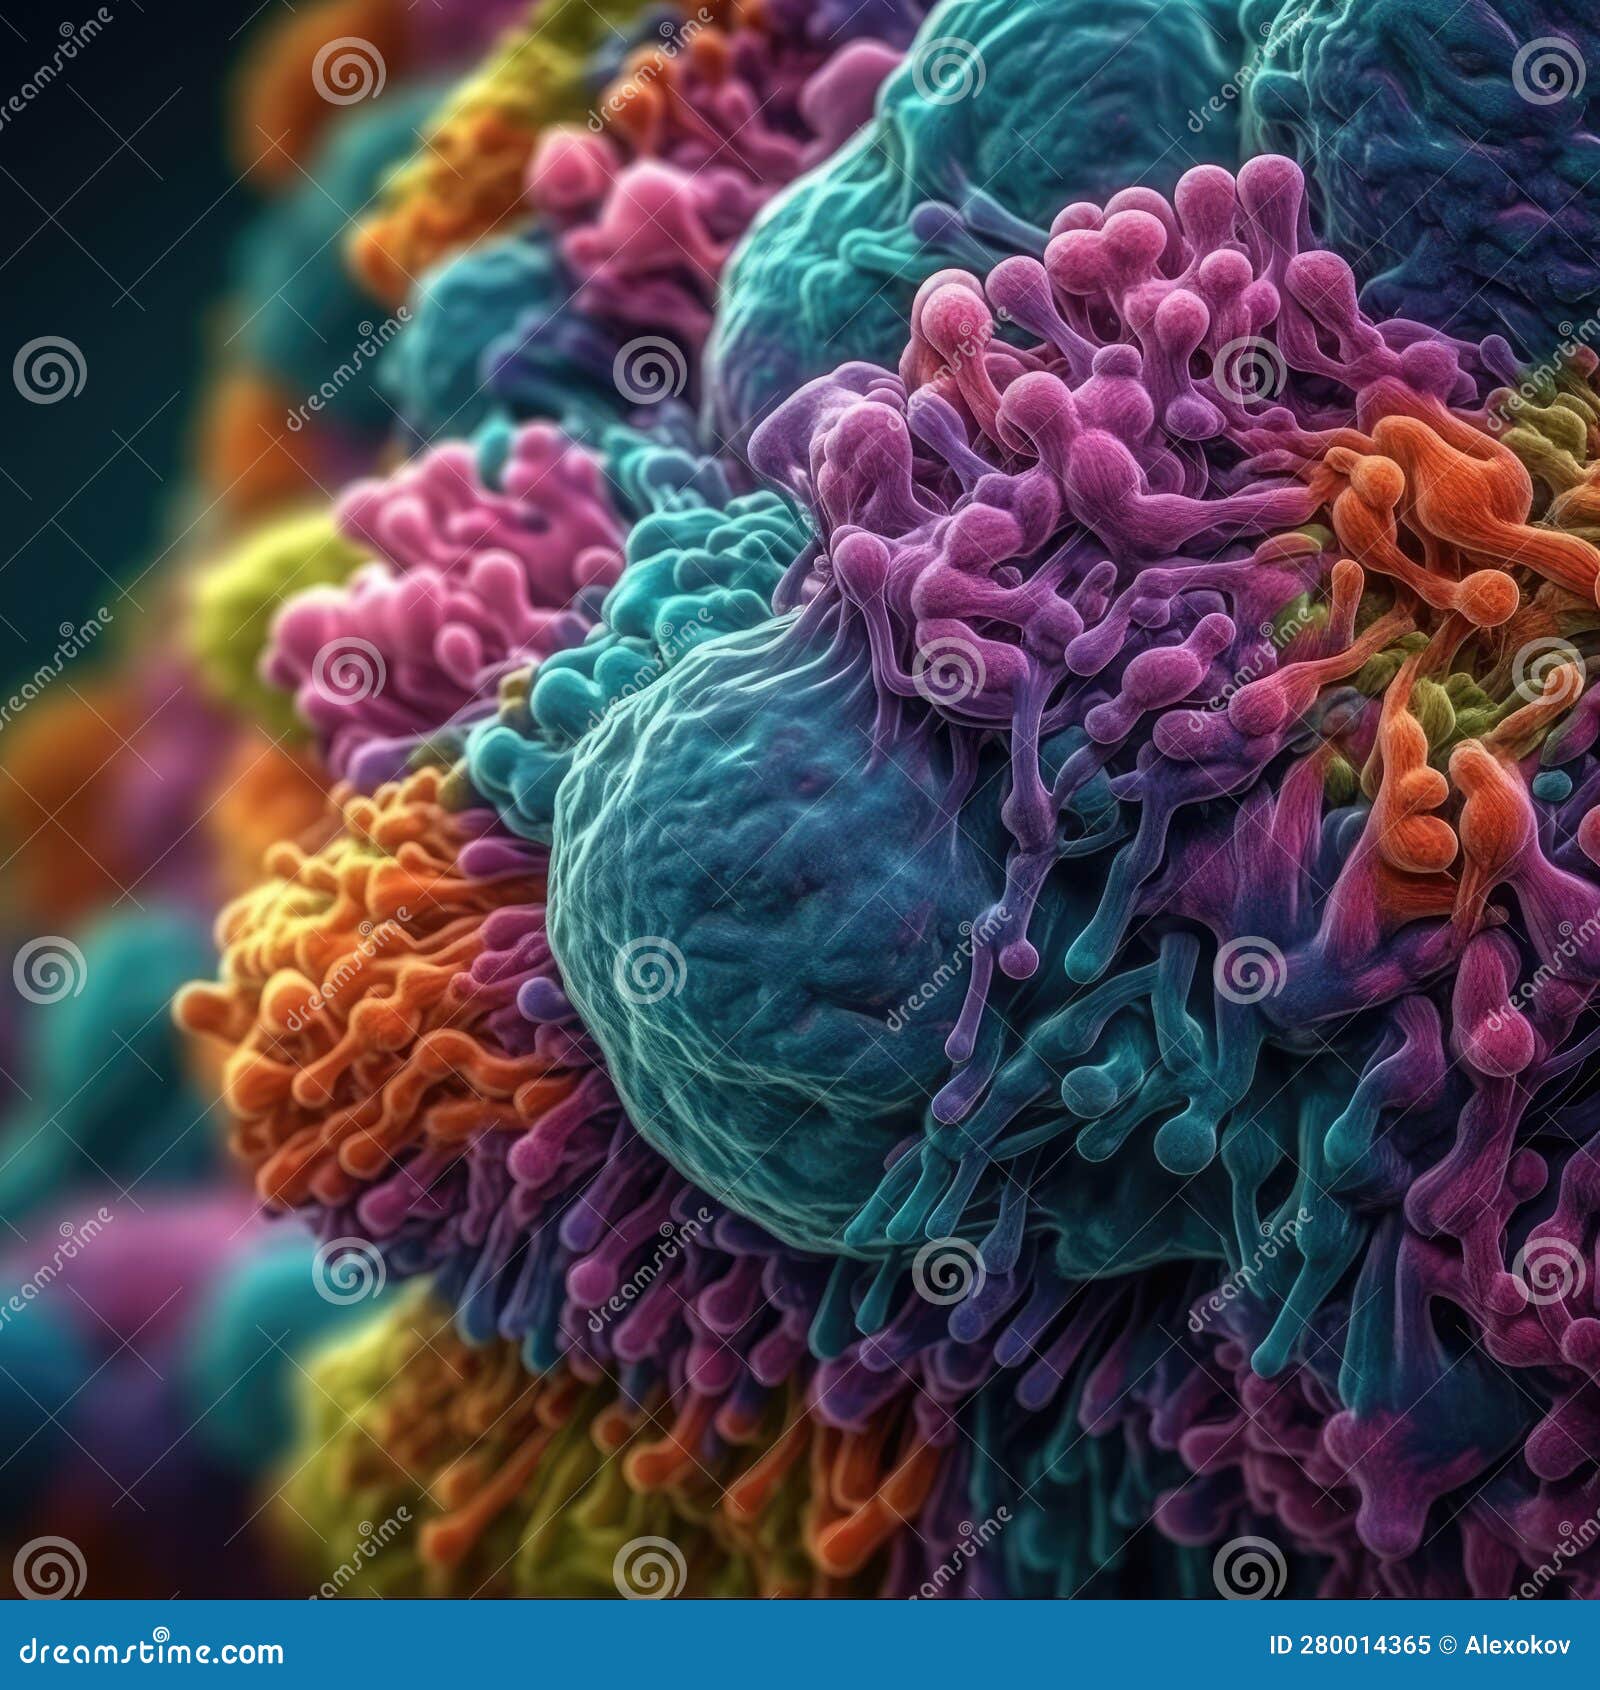 vivid colors of ribosomes synthesizing proteins in 4k electron microscope view. ideal for educational materials.